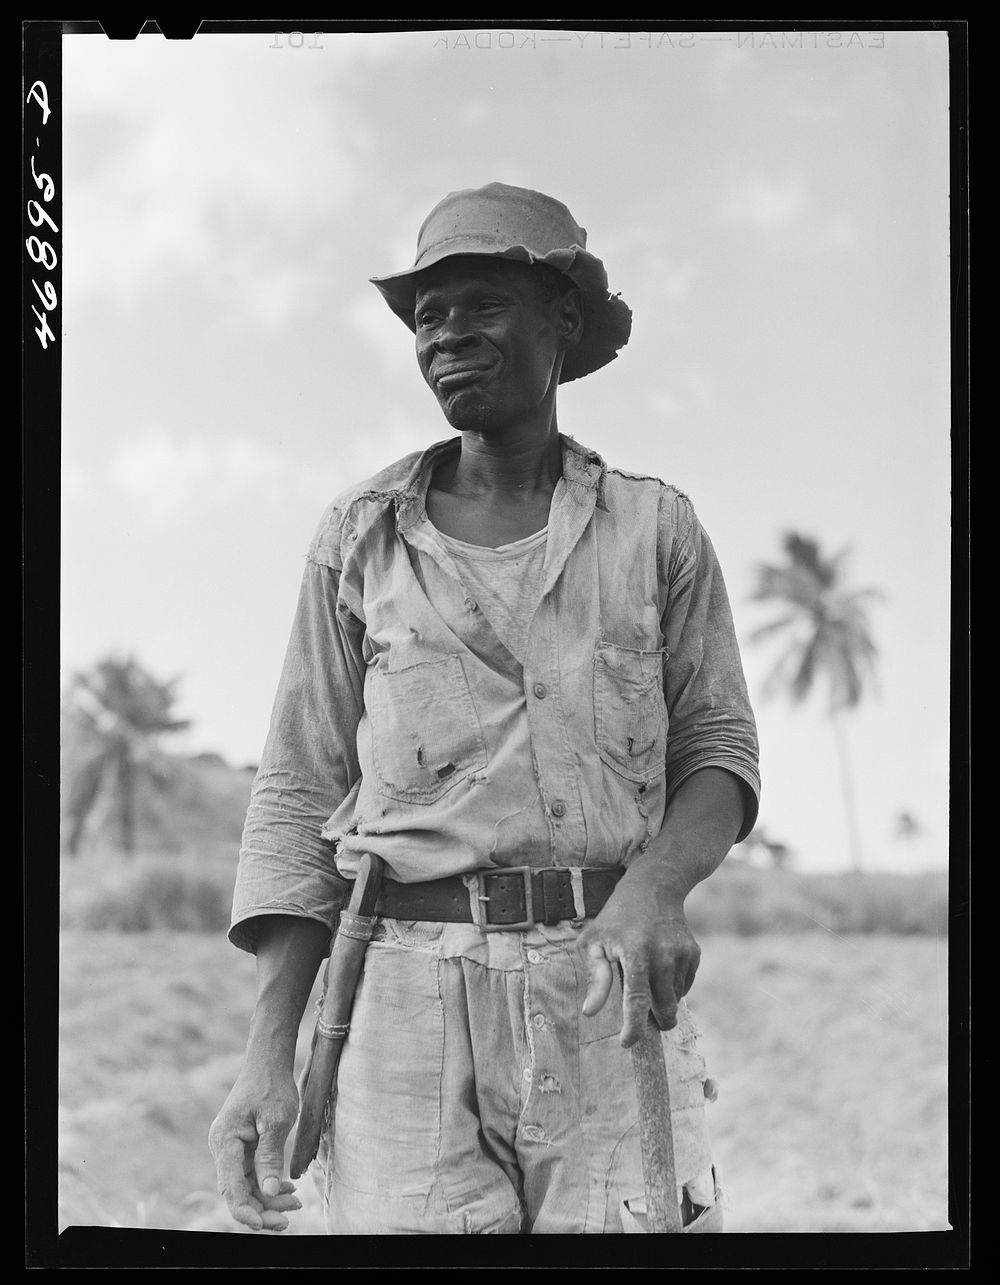 [Untitled photo, possibly related to: Christiansted (vicinity), Saint Croix Island, Virgin Islands. Outfit worn by a farmer…